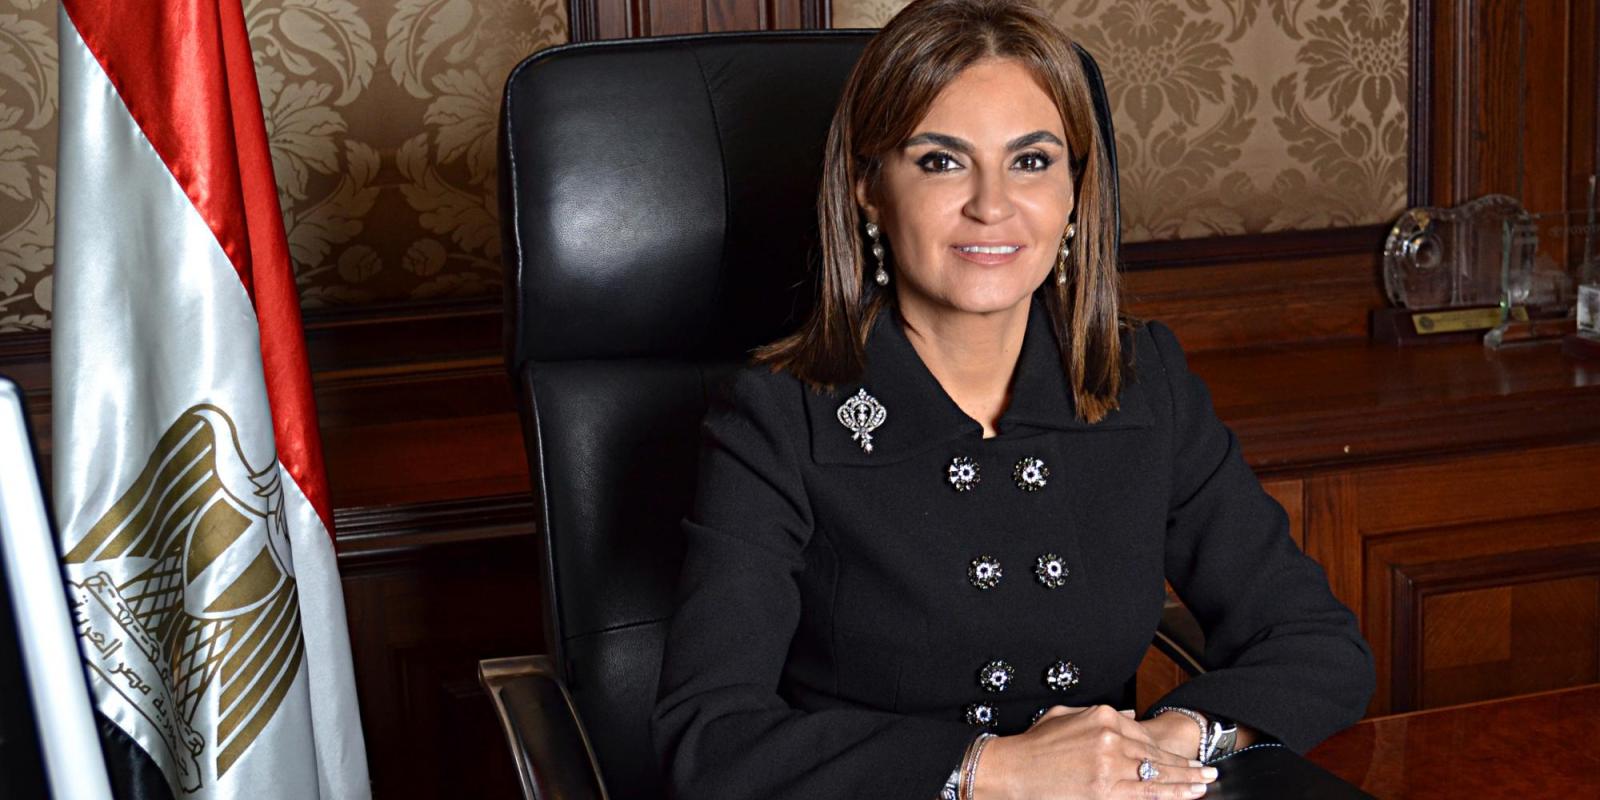 Sahar Nasr looks to share her global vision as the new Minister of International Cooperation